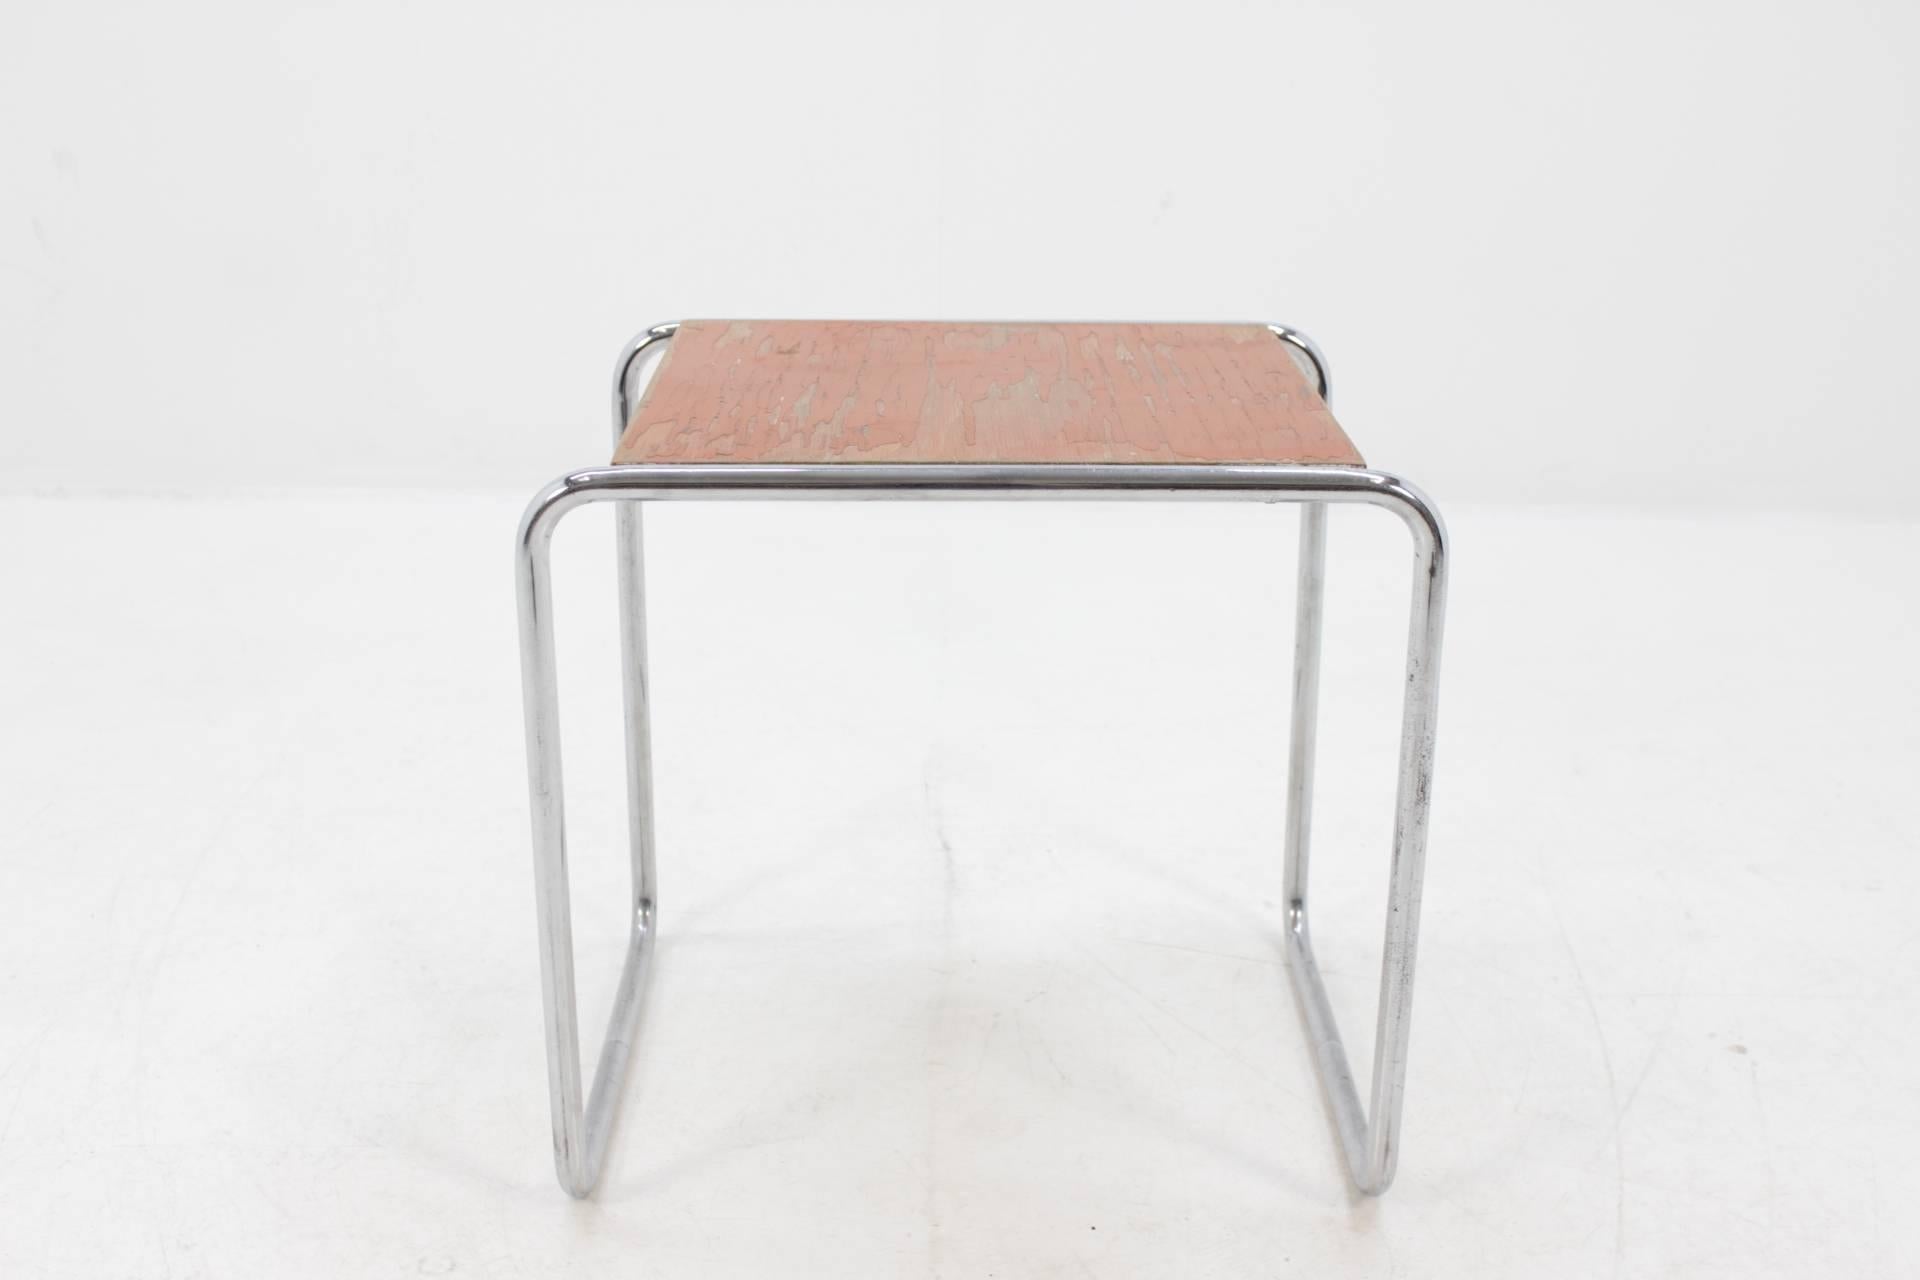 - 1930s, Germany
- Marcel Breuer
- Original condition
- Original red color, partly missing 
- Labeled.